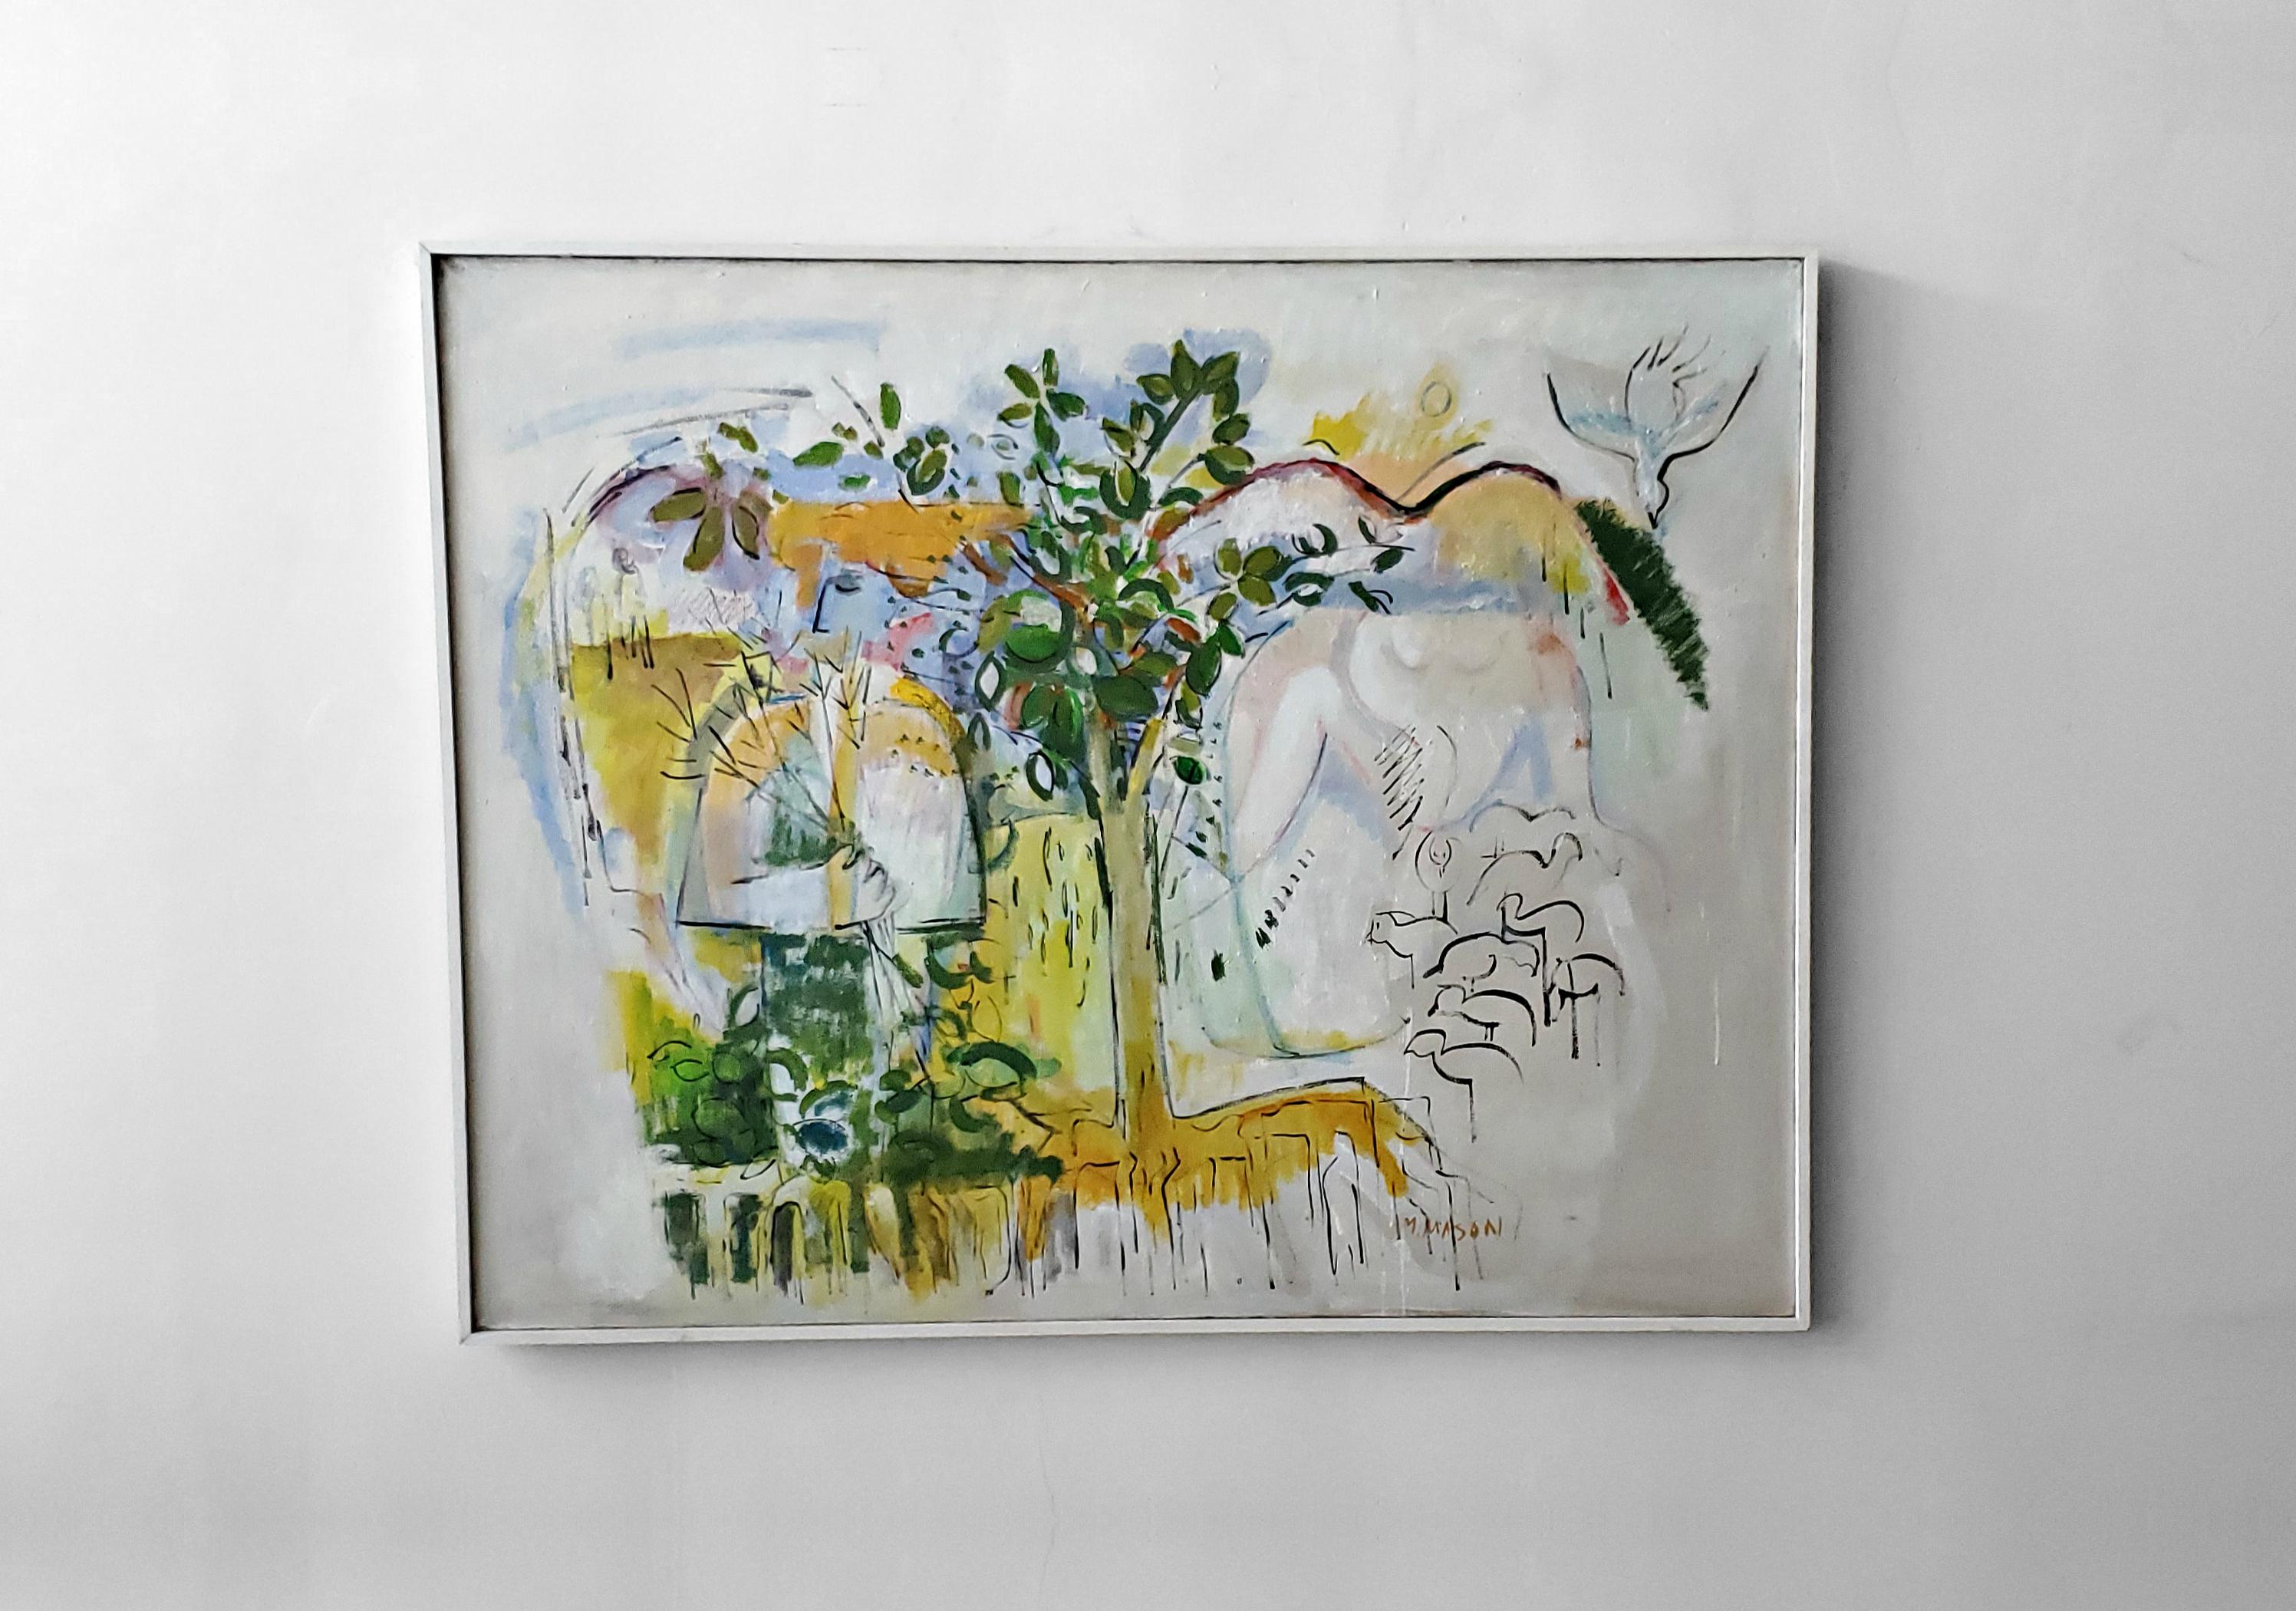 From the local estate of Jean Knudson an avid artist and art collector, comes this Huge 62 x 49, beautiful abstract realism painting on canvas. Abstract figures and animals set in a garden like setting, a great use of contrasting vibrant and subtle